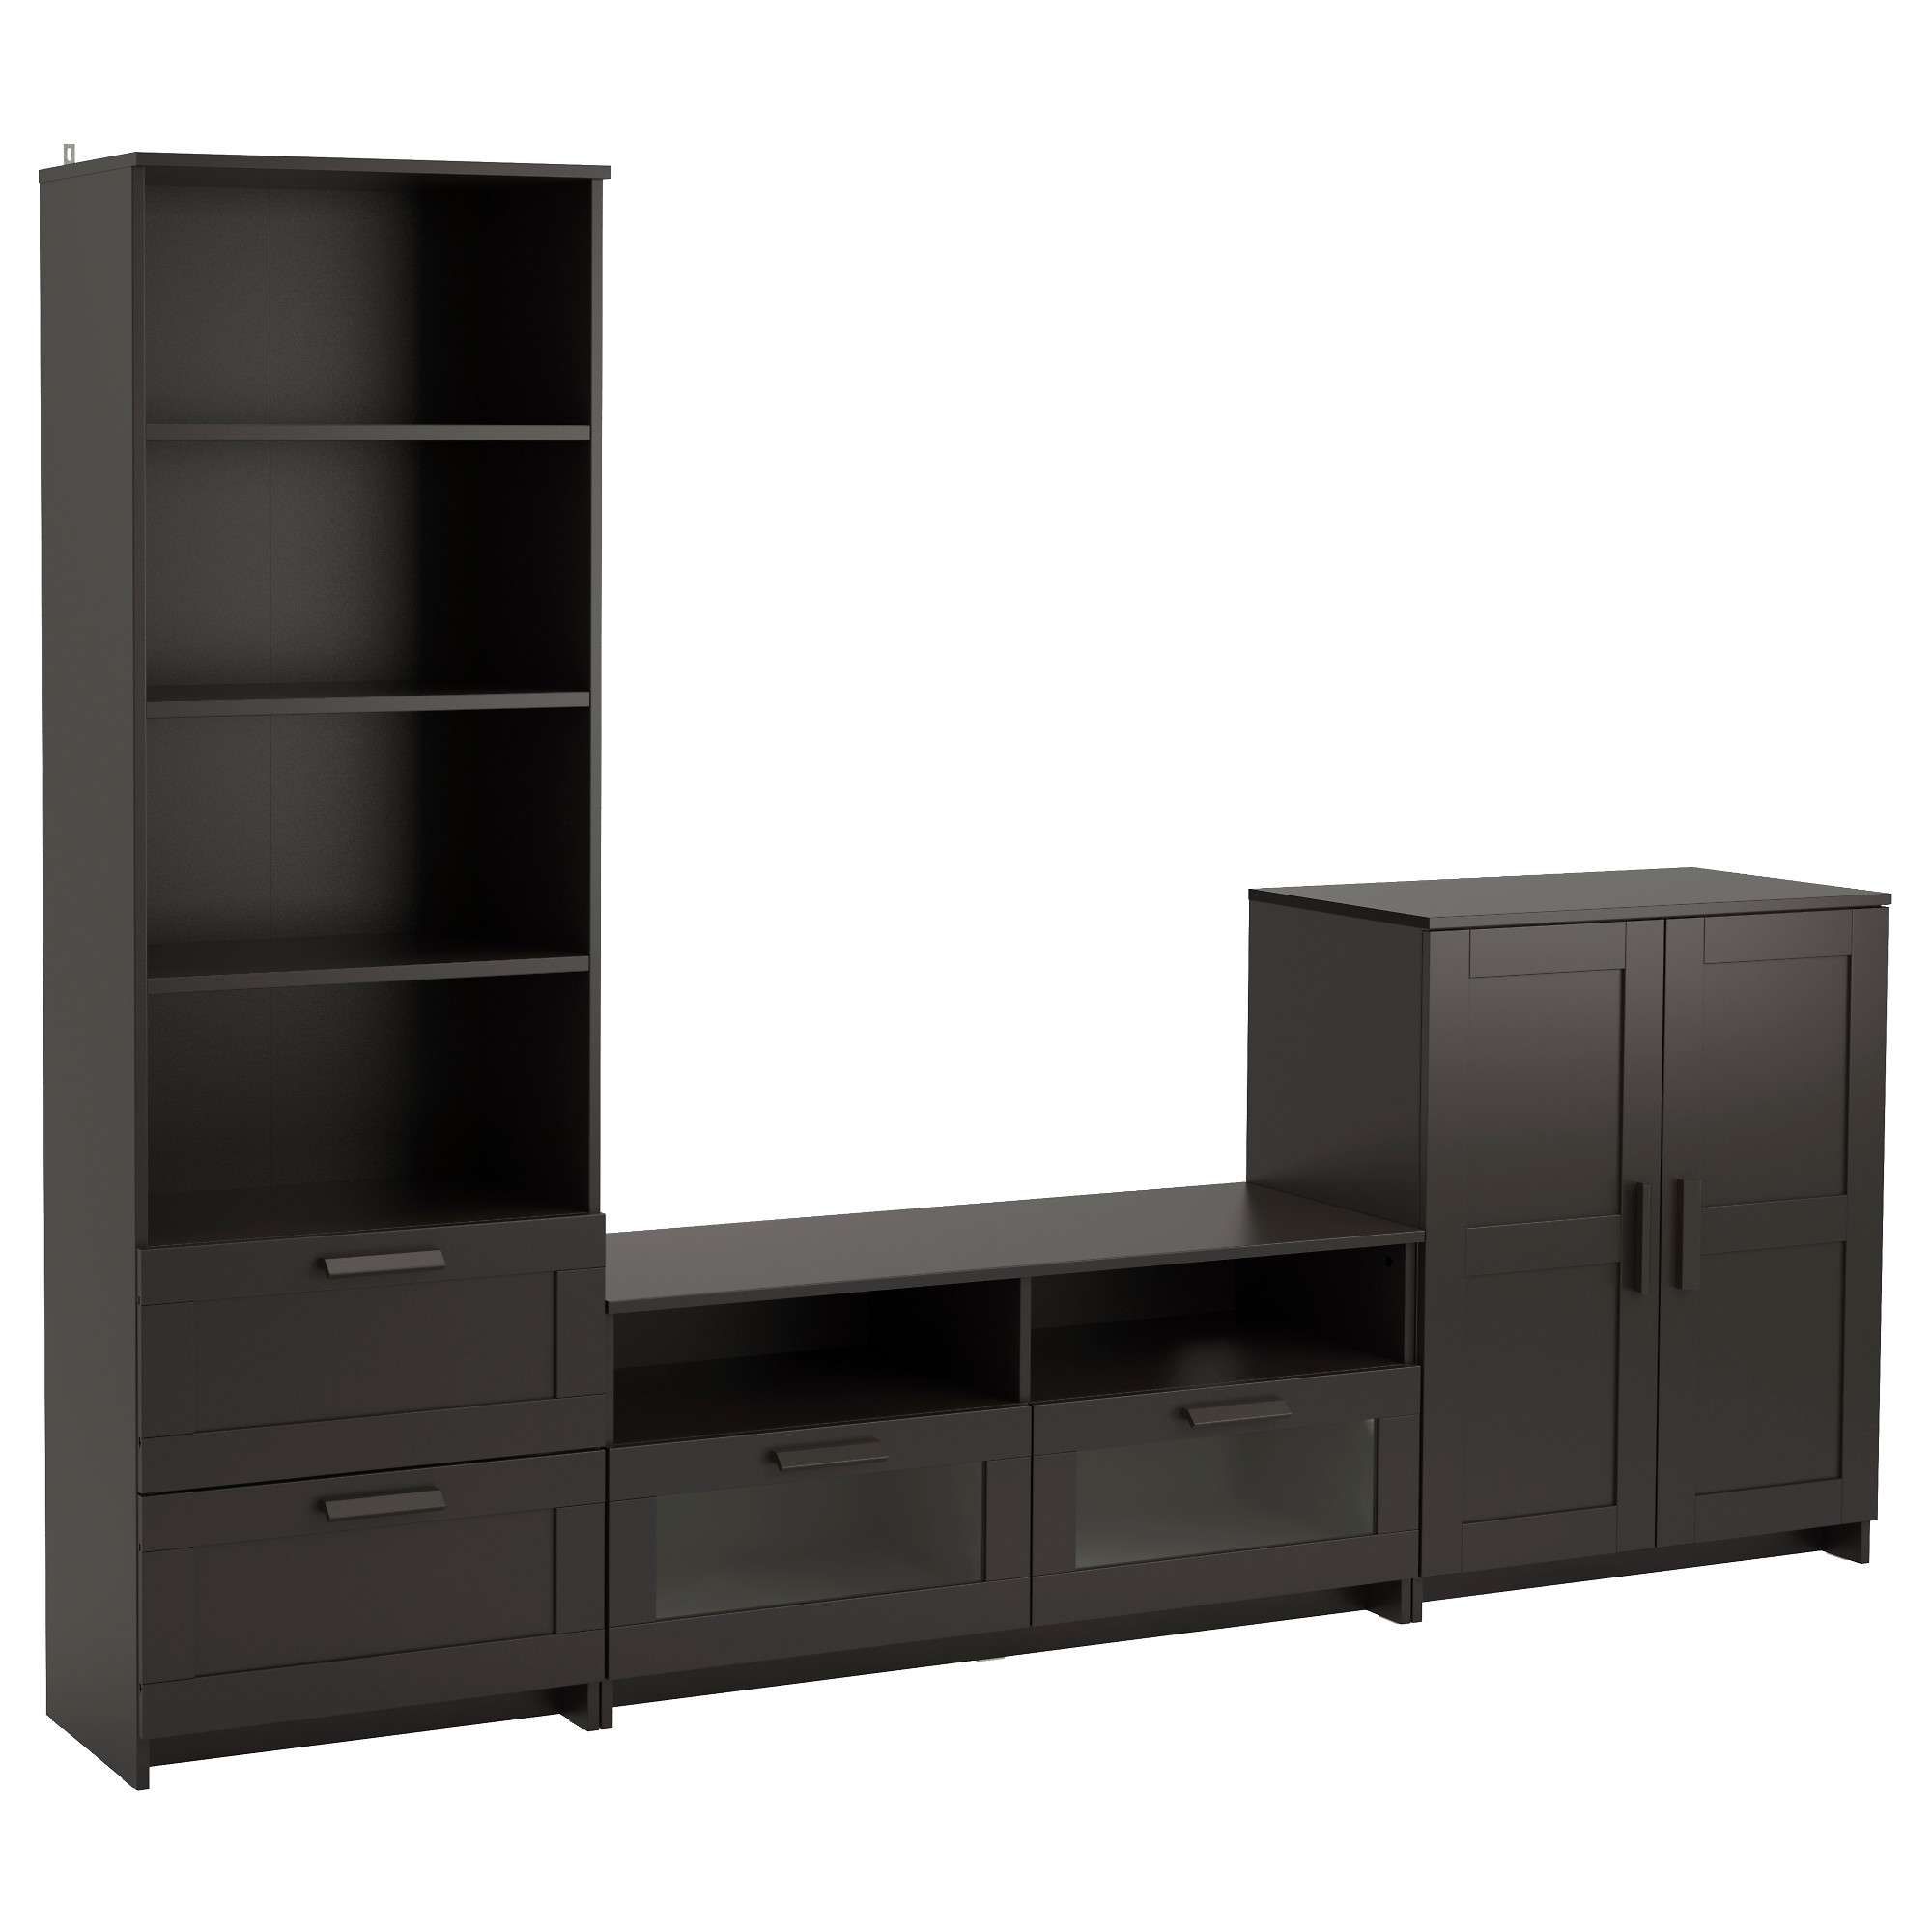 Tv Stands & Tv Units | Ikea Regarding Long Low Tv Cabinets (View 15 of 20)